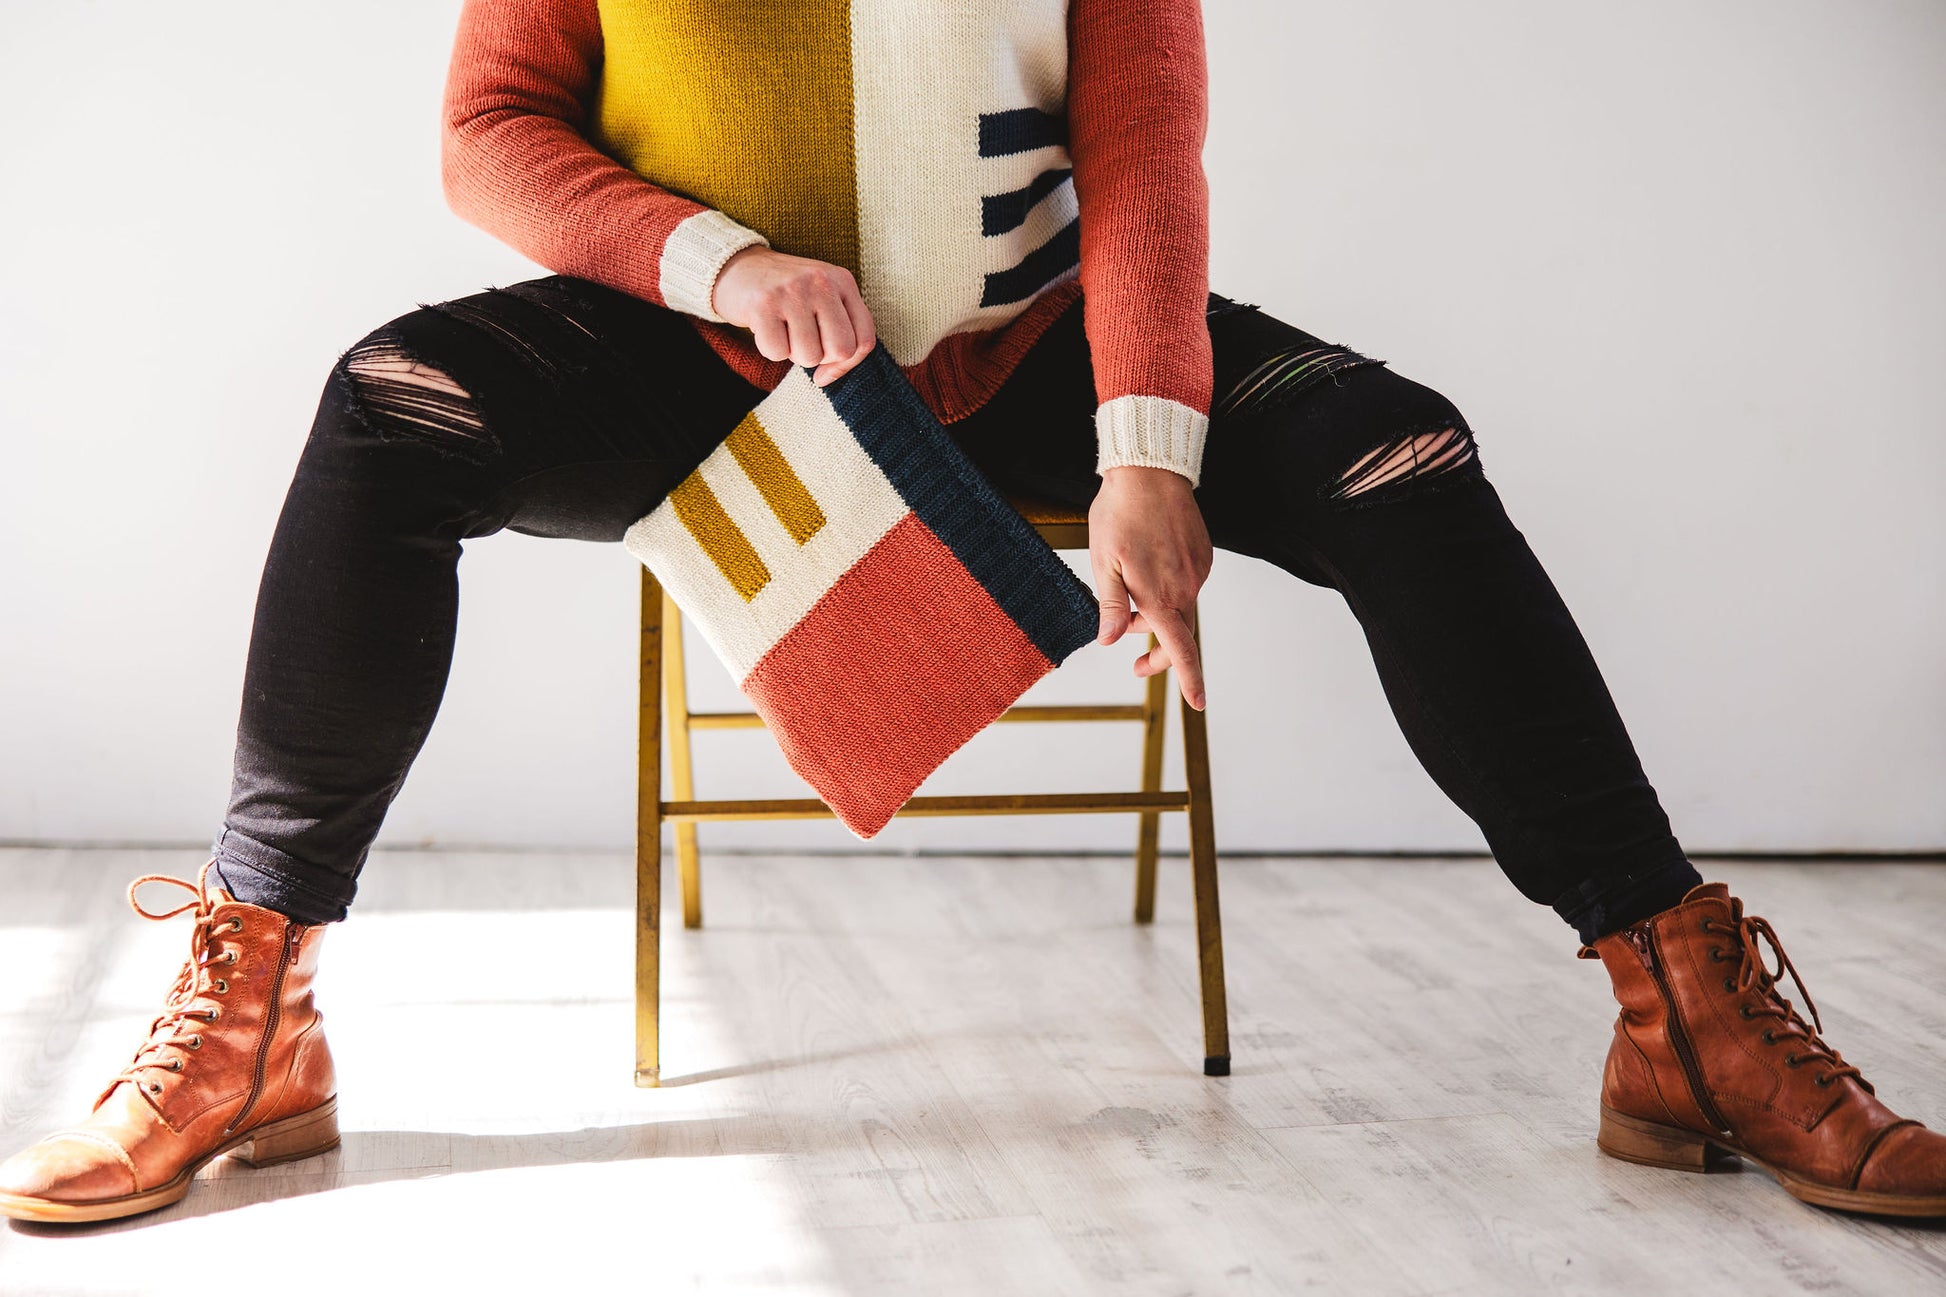 Jen (seen from the torso down) sits on a chair. She wears a knit sweater with a white, blue, red, and yellow colorblock design (the Study Group sweater), paired with black ripped jeans and leather boots. She holds a knit pouch (the Case Study pouch) that has the same intarsia colorwork design as her sweater.